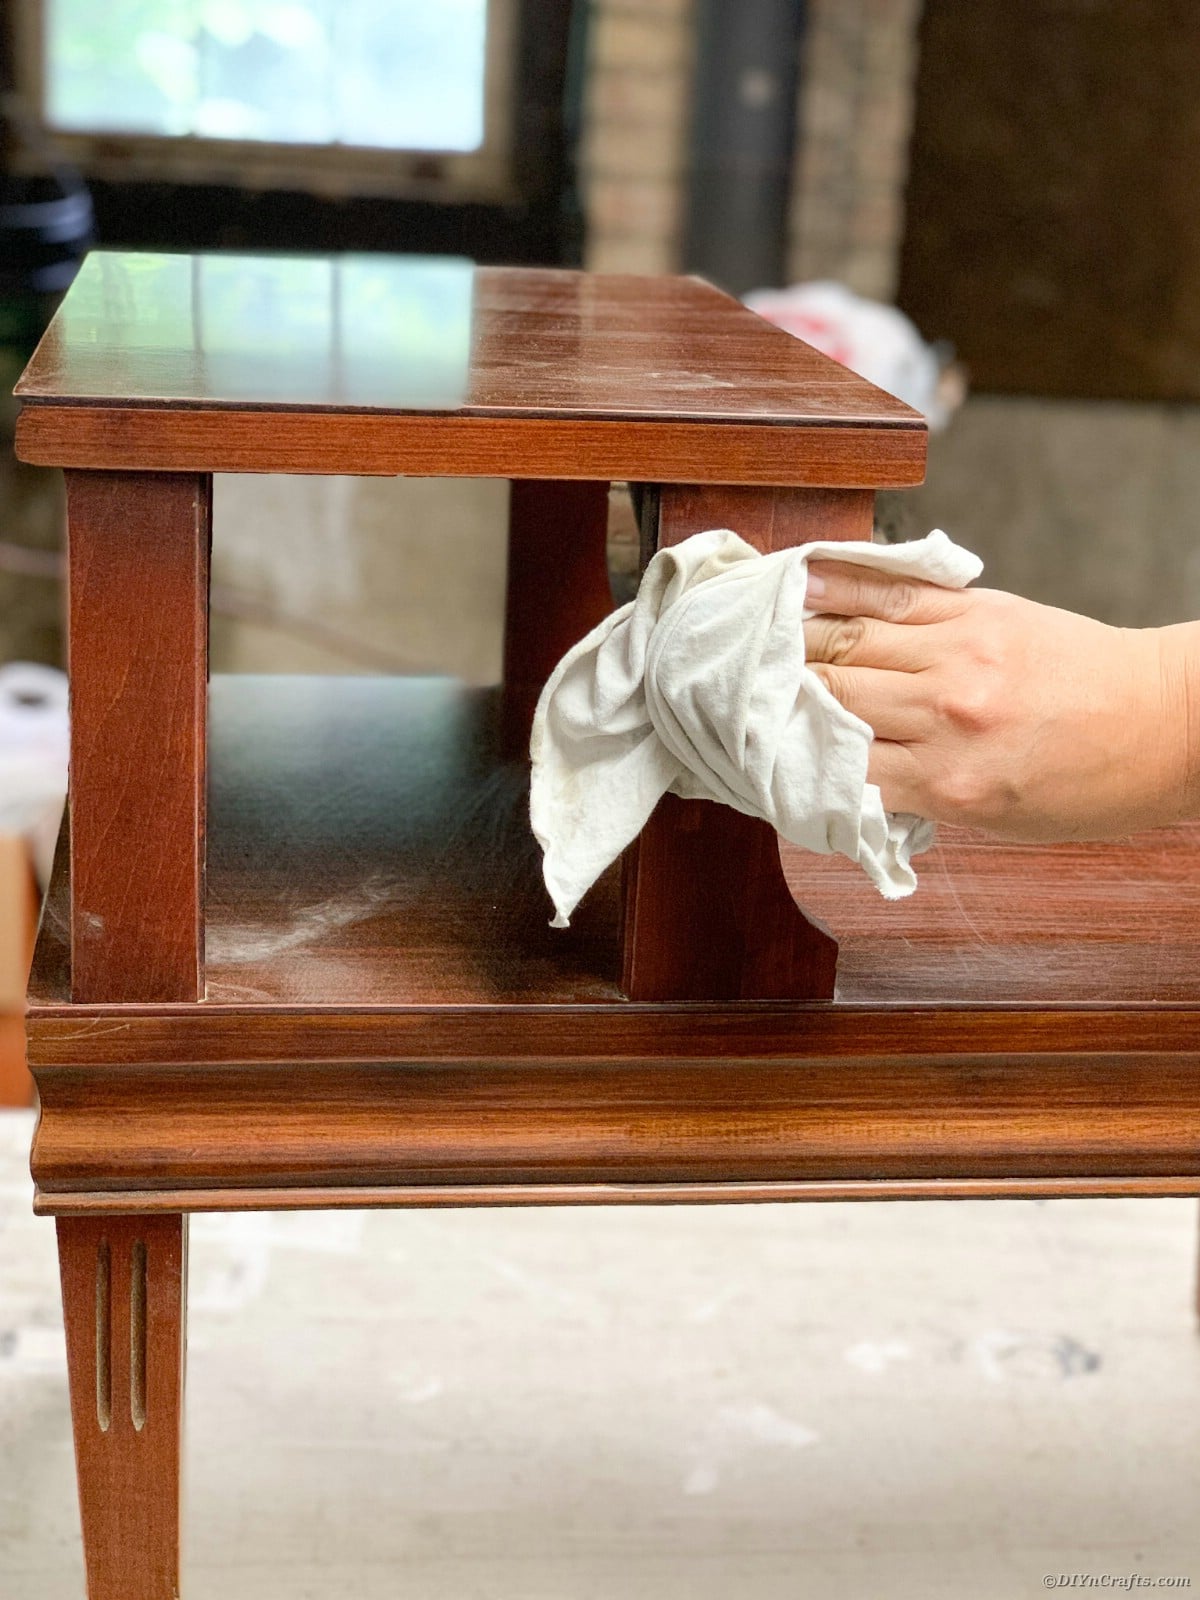 Wiping table